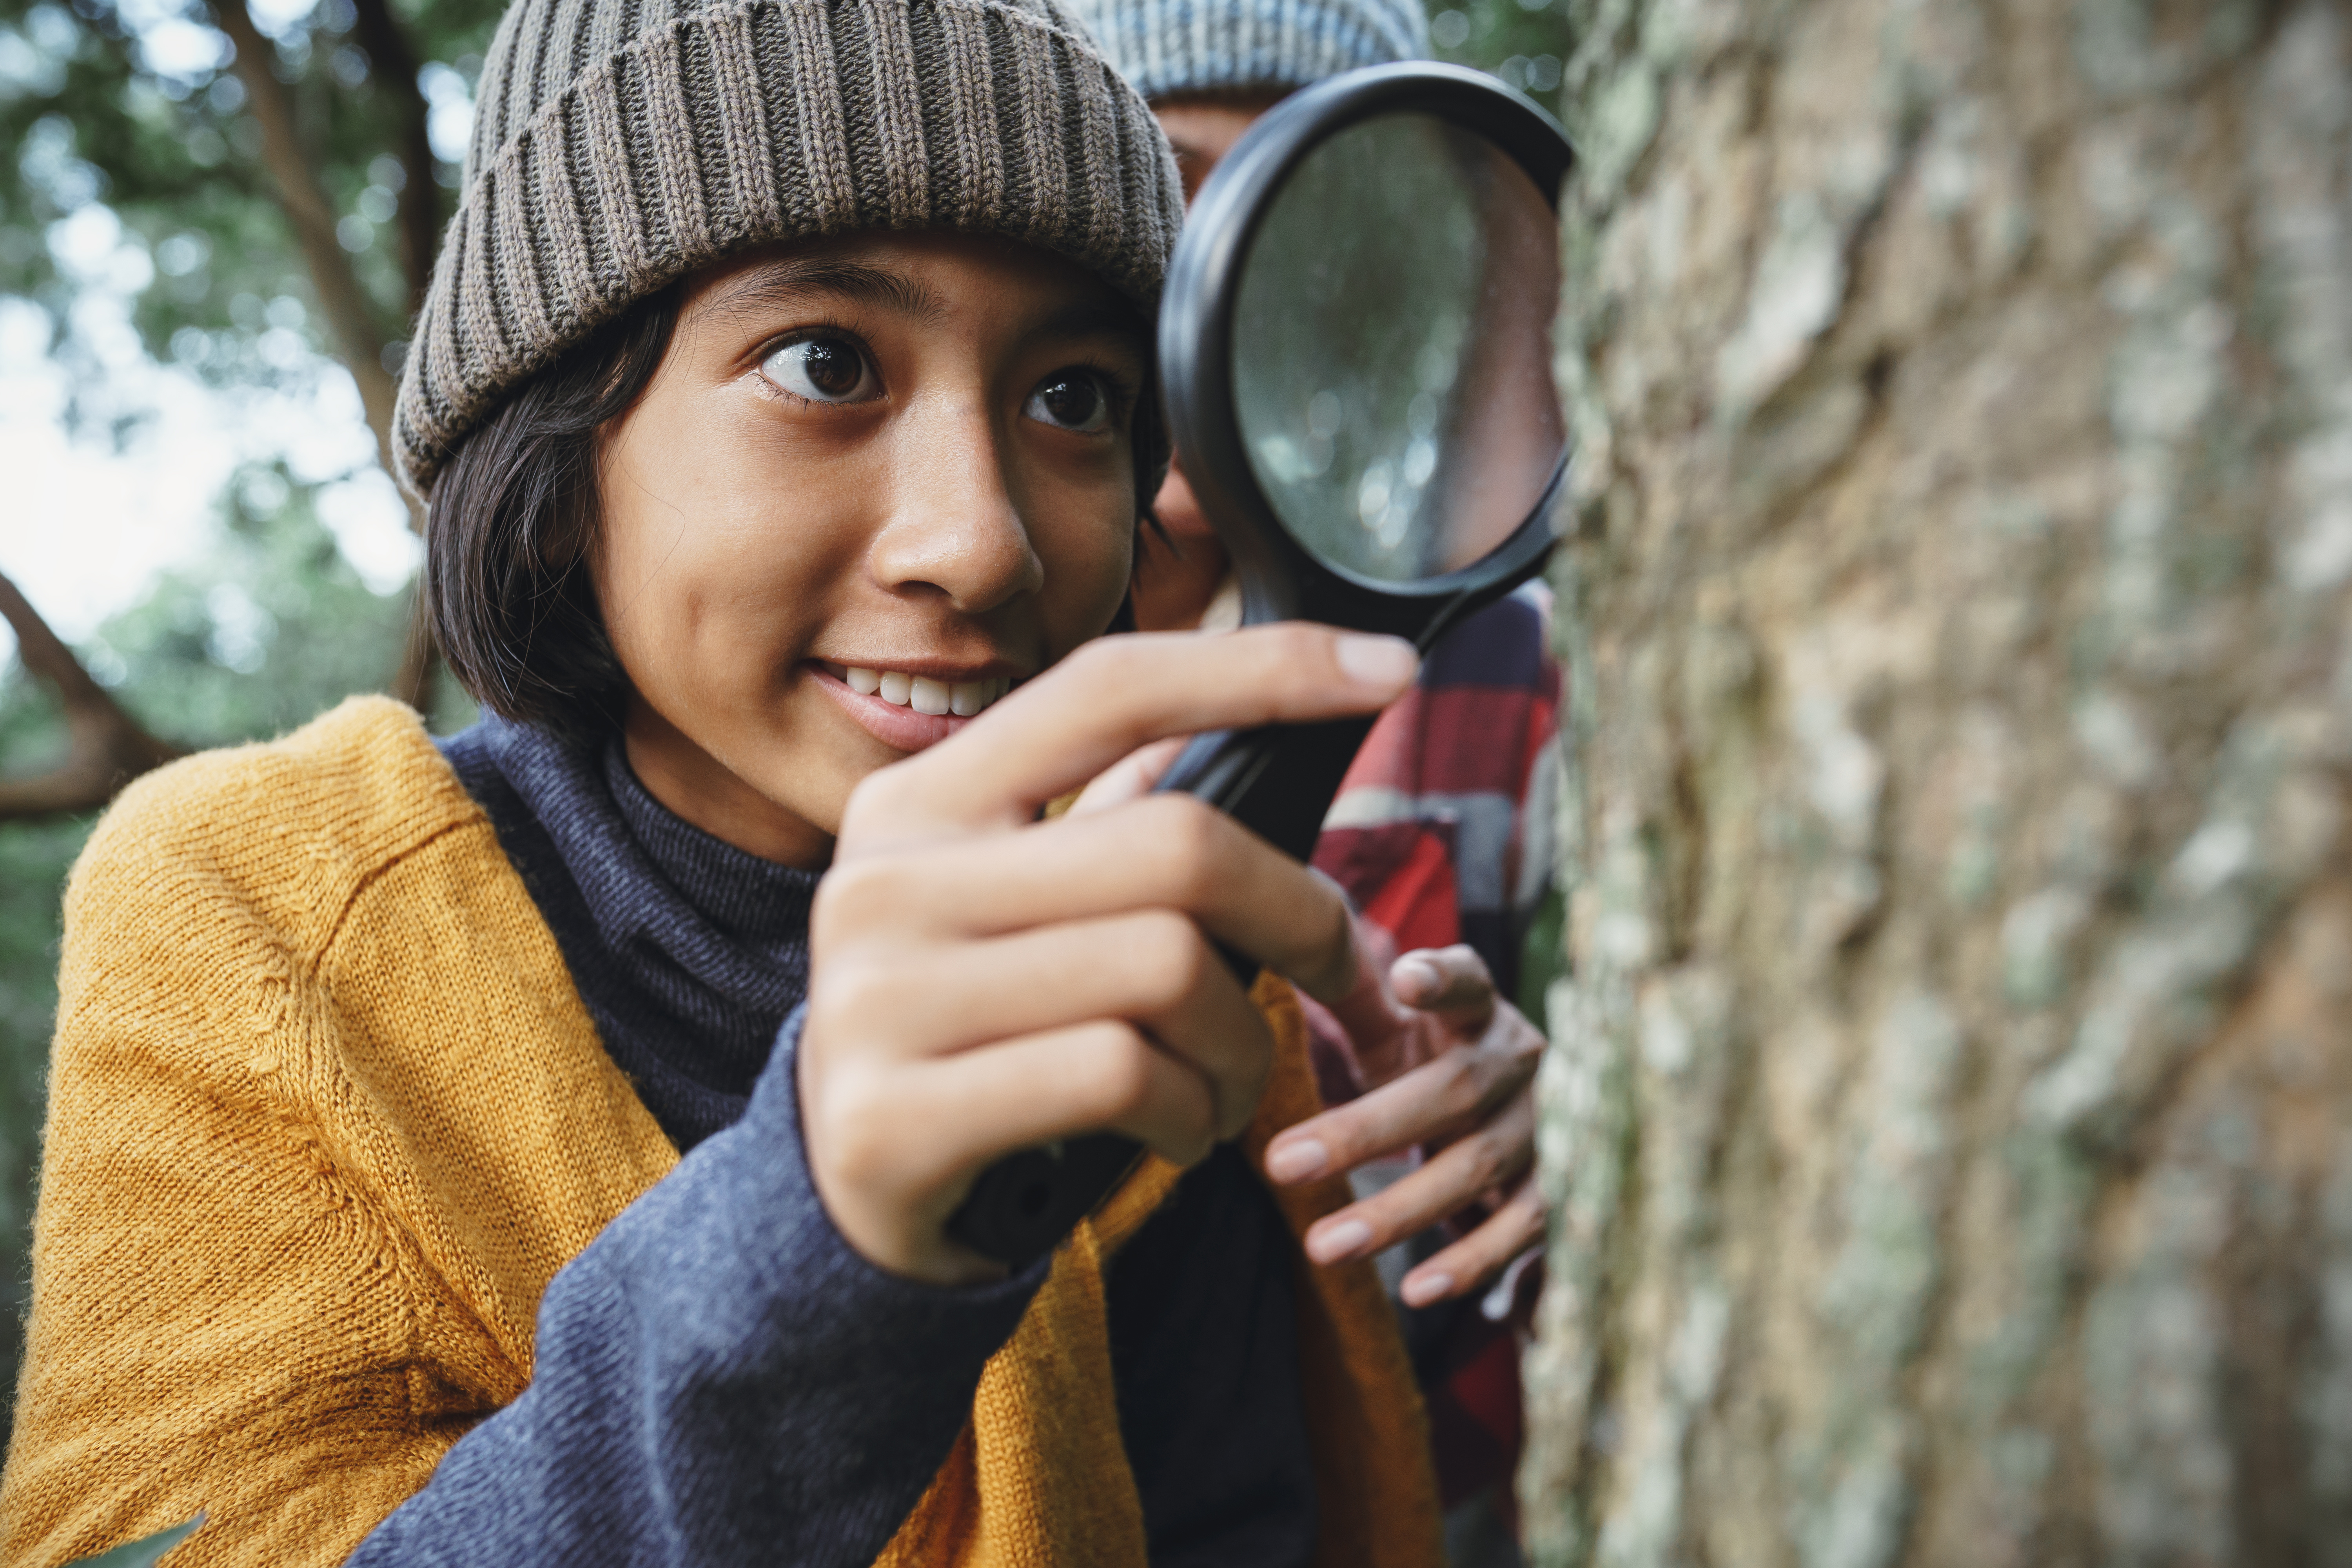 A young person examines a tree with a magnifying glass